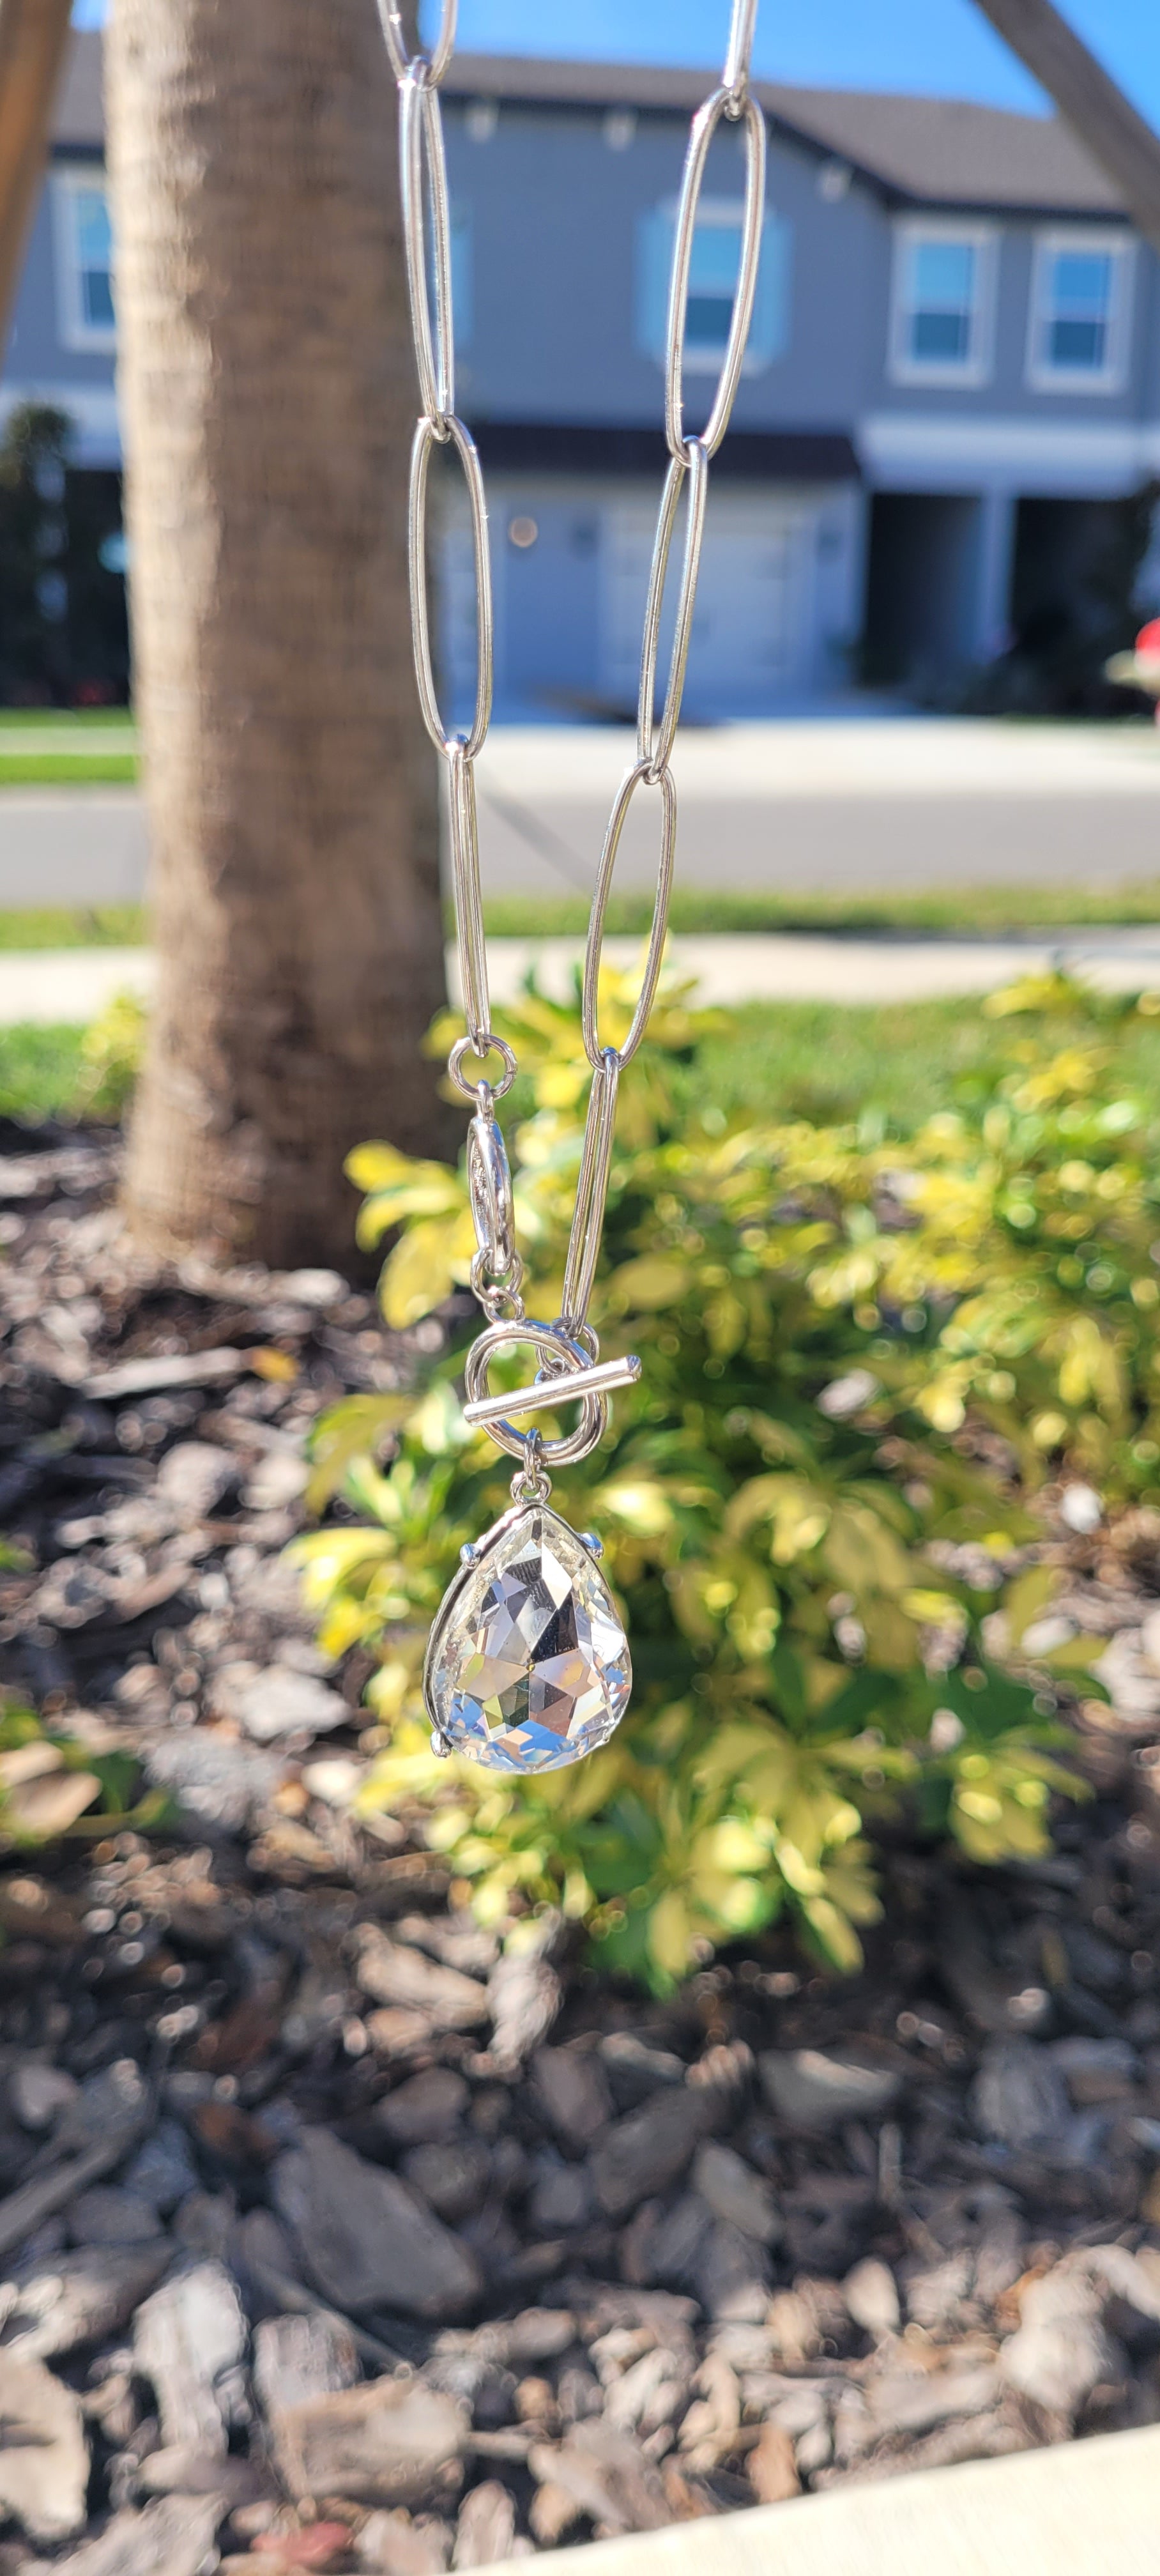 Pink Panache Necklace Color: Silver chain necklace with clear crystal teardrop shape pendant Limited supply!  